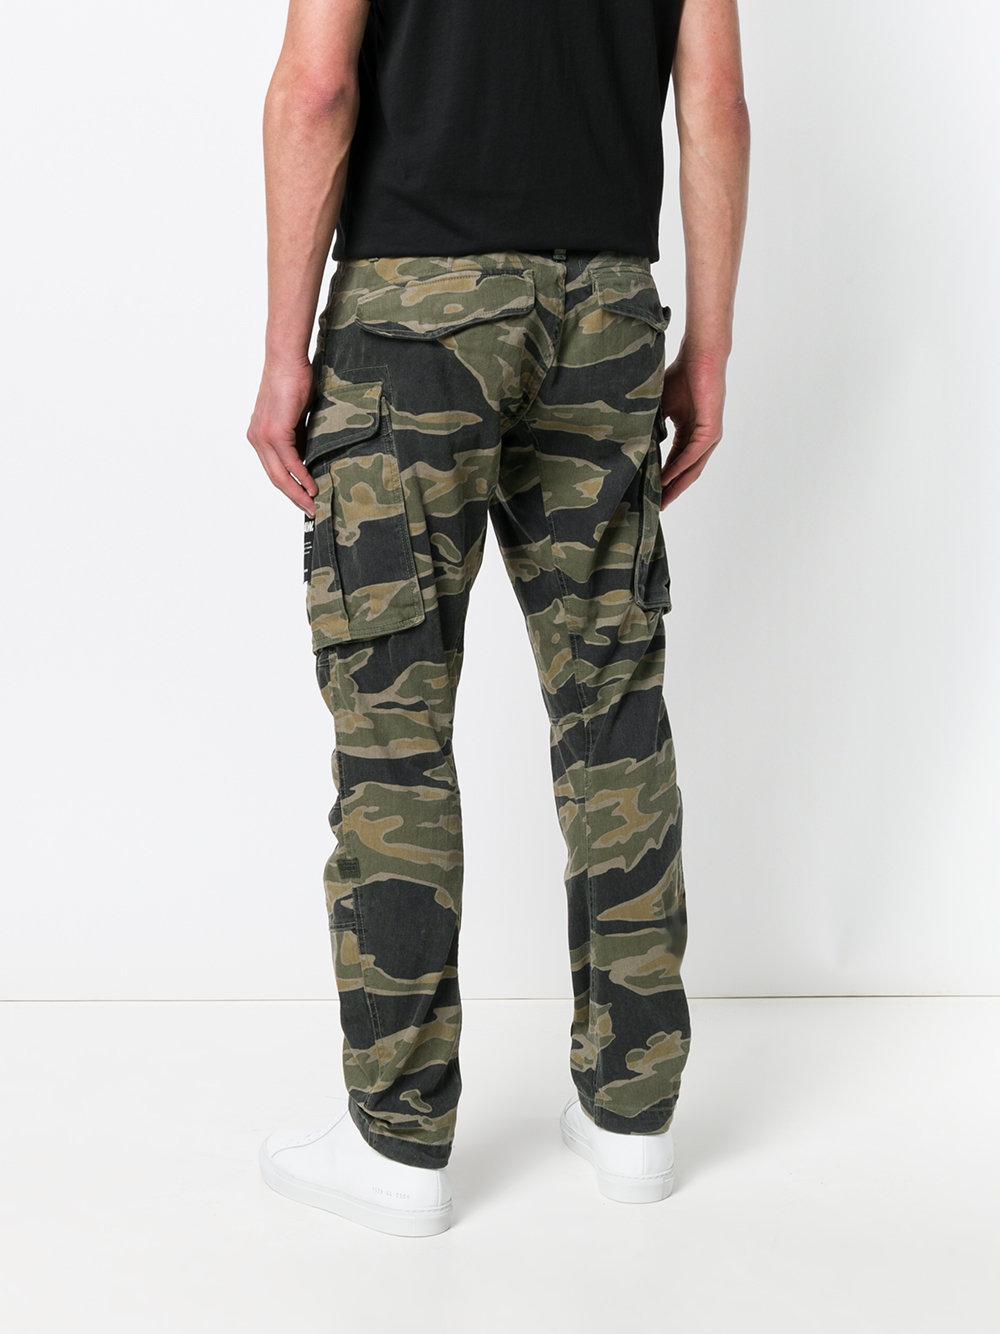 G-Star RAW Cotton Camouflage Cargo Trousers in Green for Men - Lyst